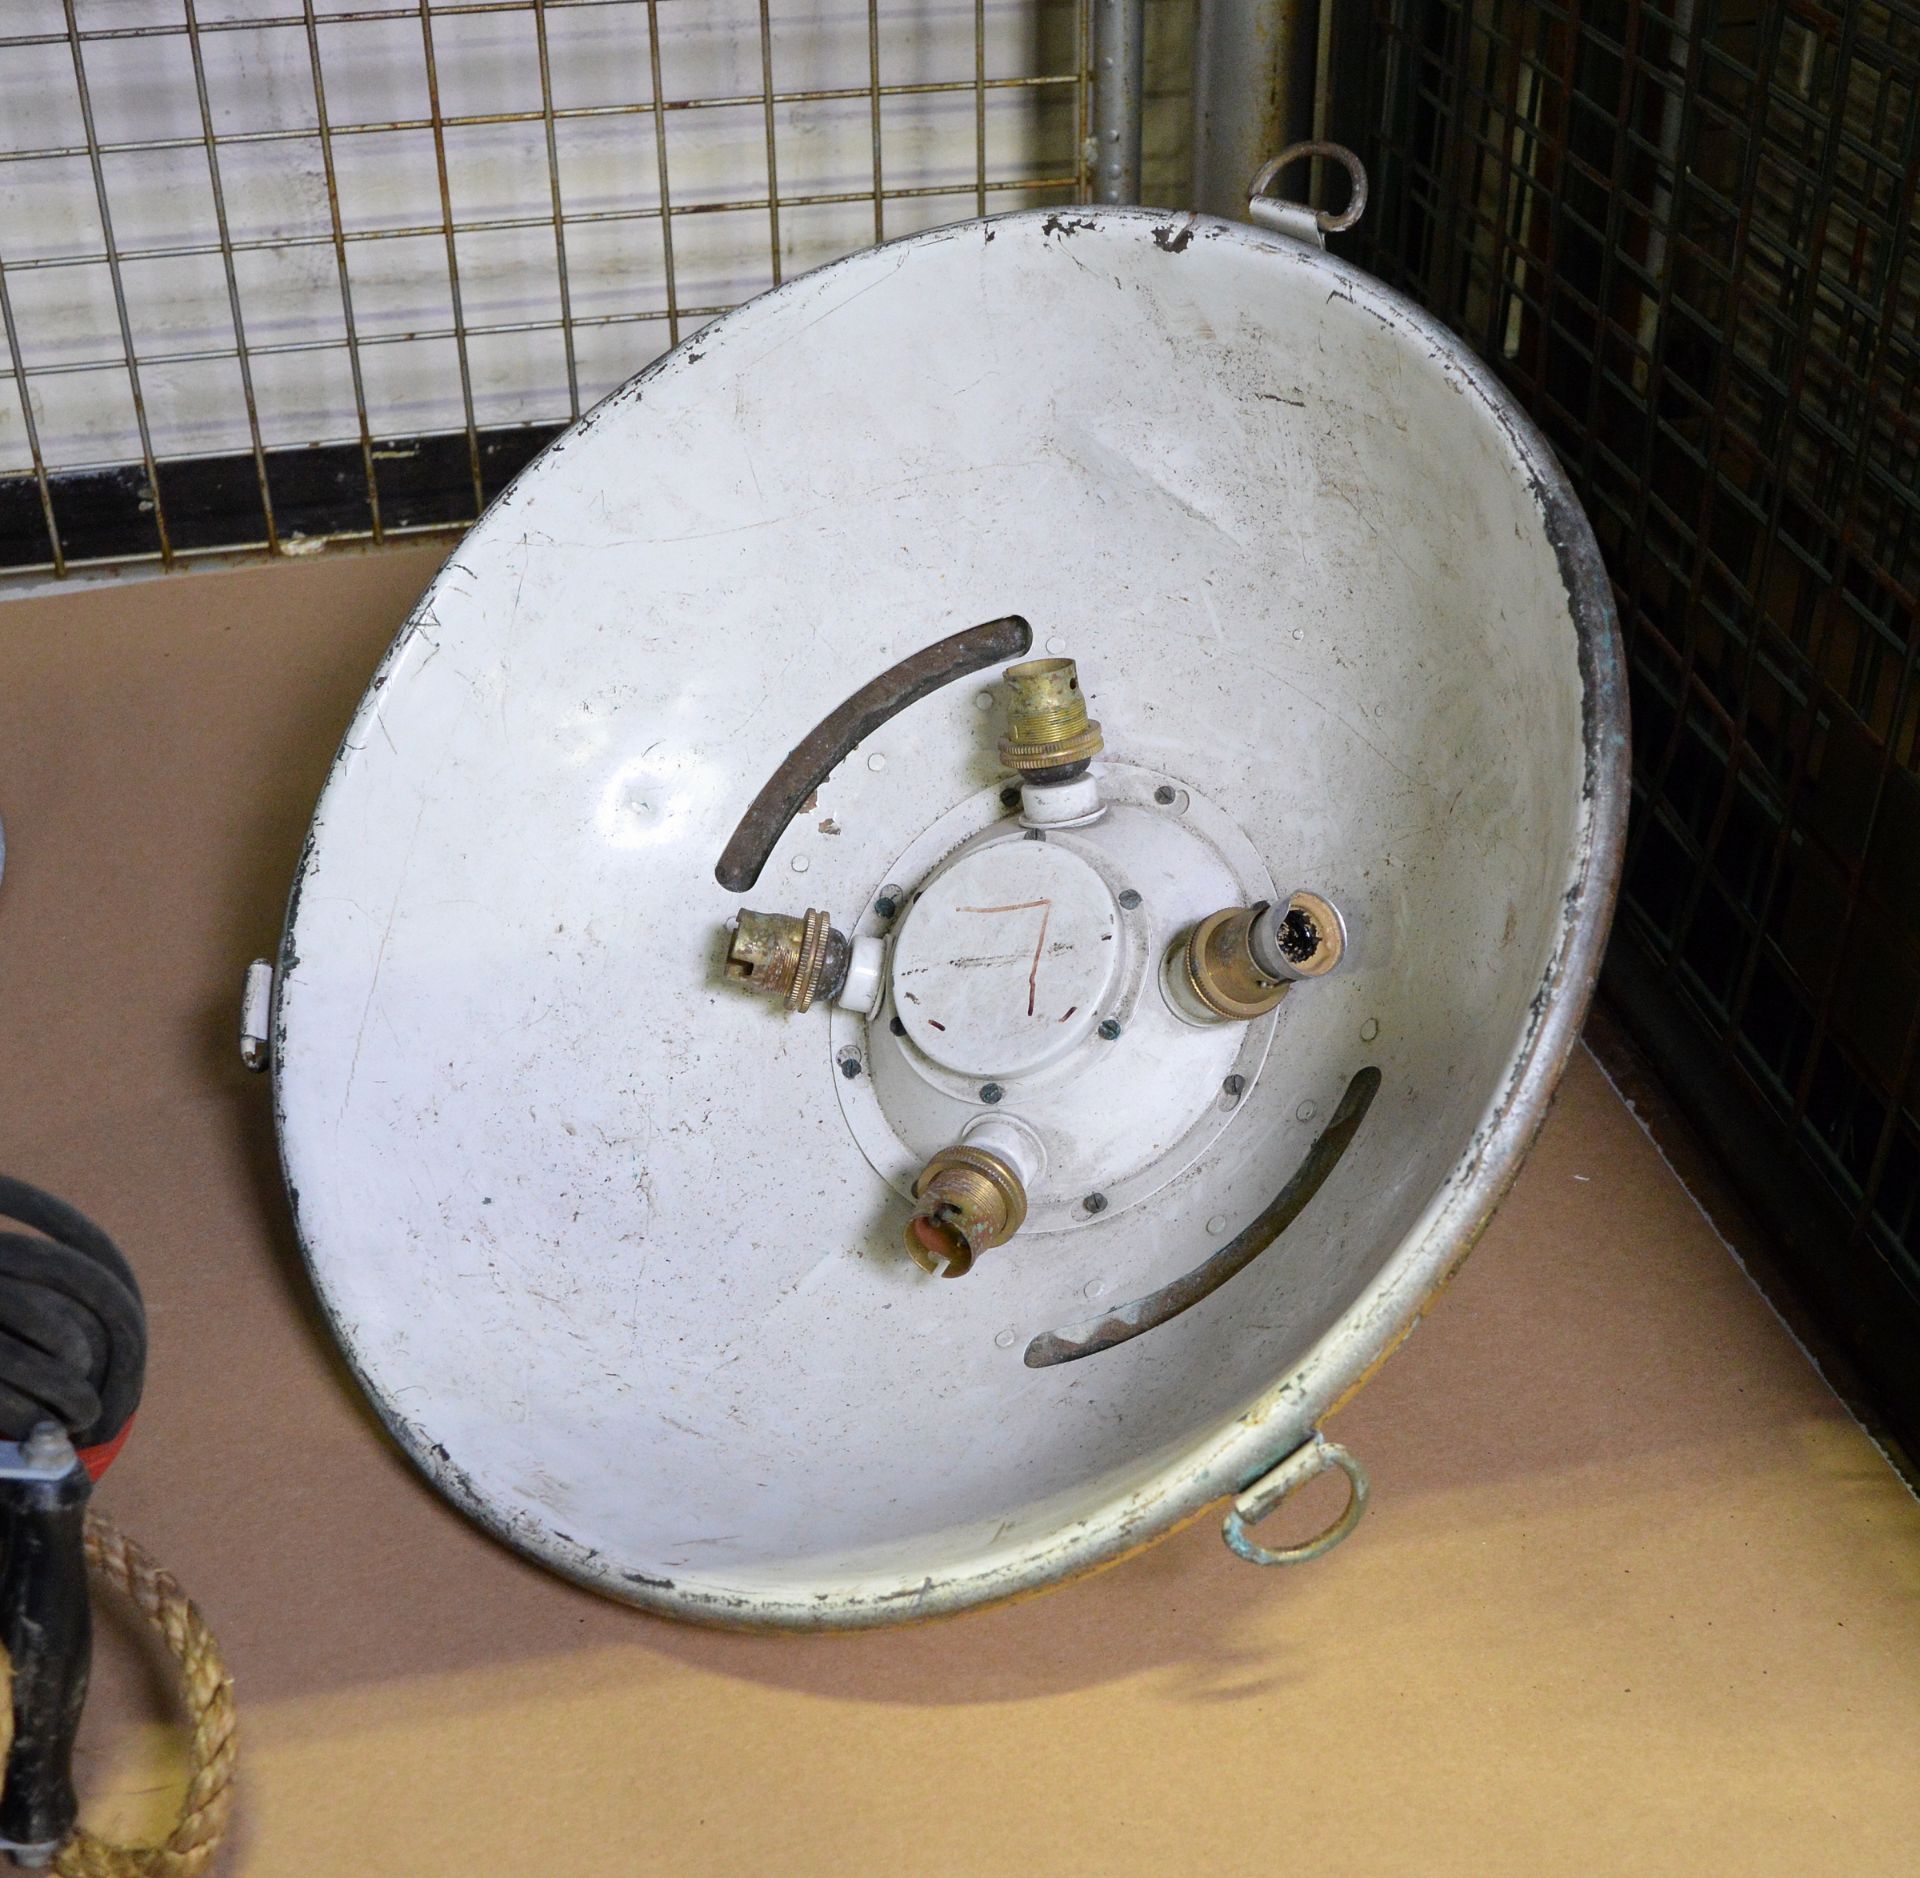 1x Brass Dome Suspended 4-way Light Unit, 3x Portable Painted Brass Floodlights - Image 5 of 5